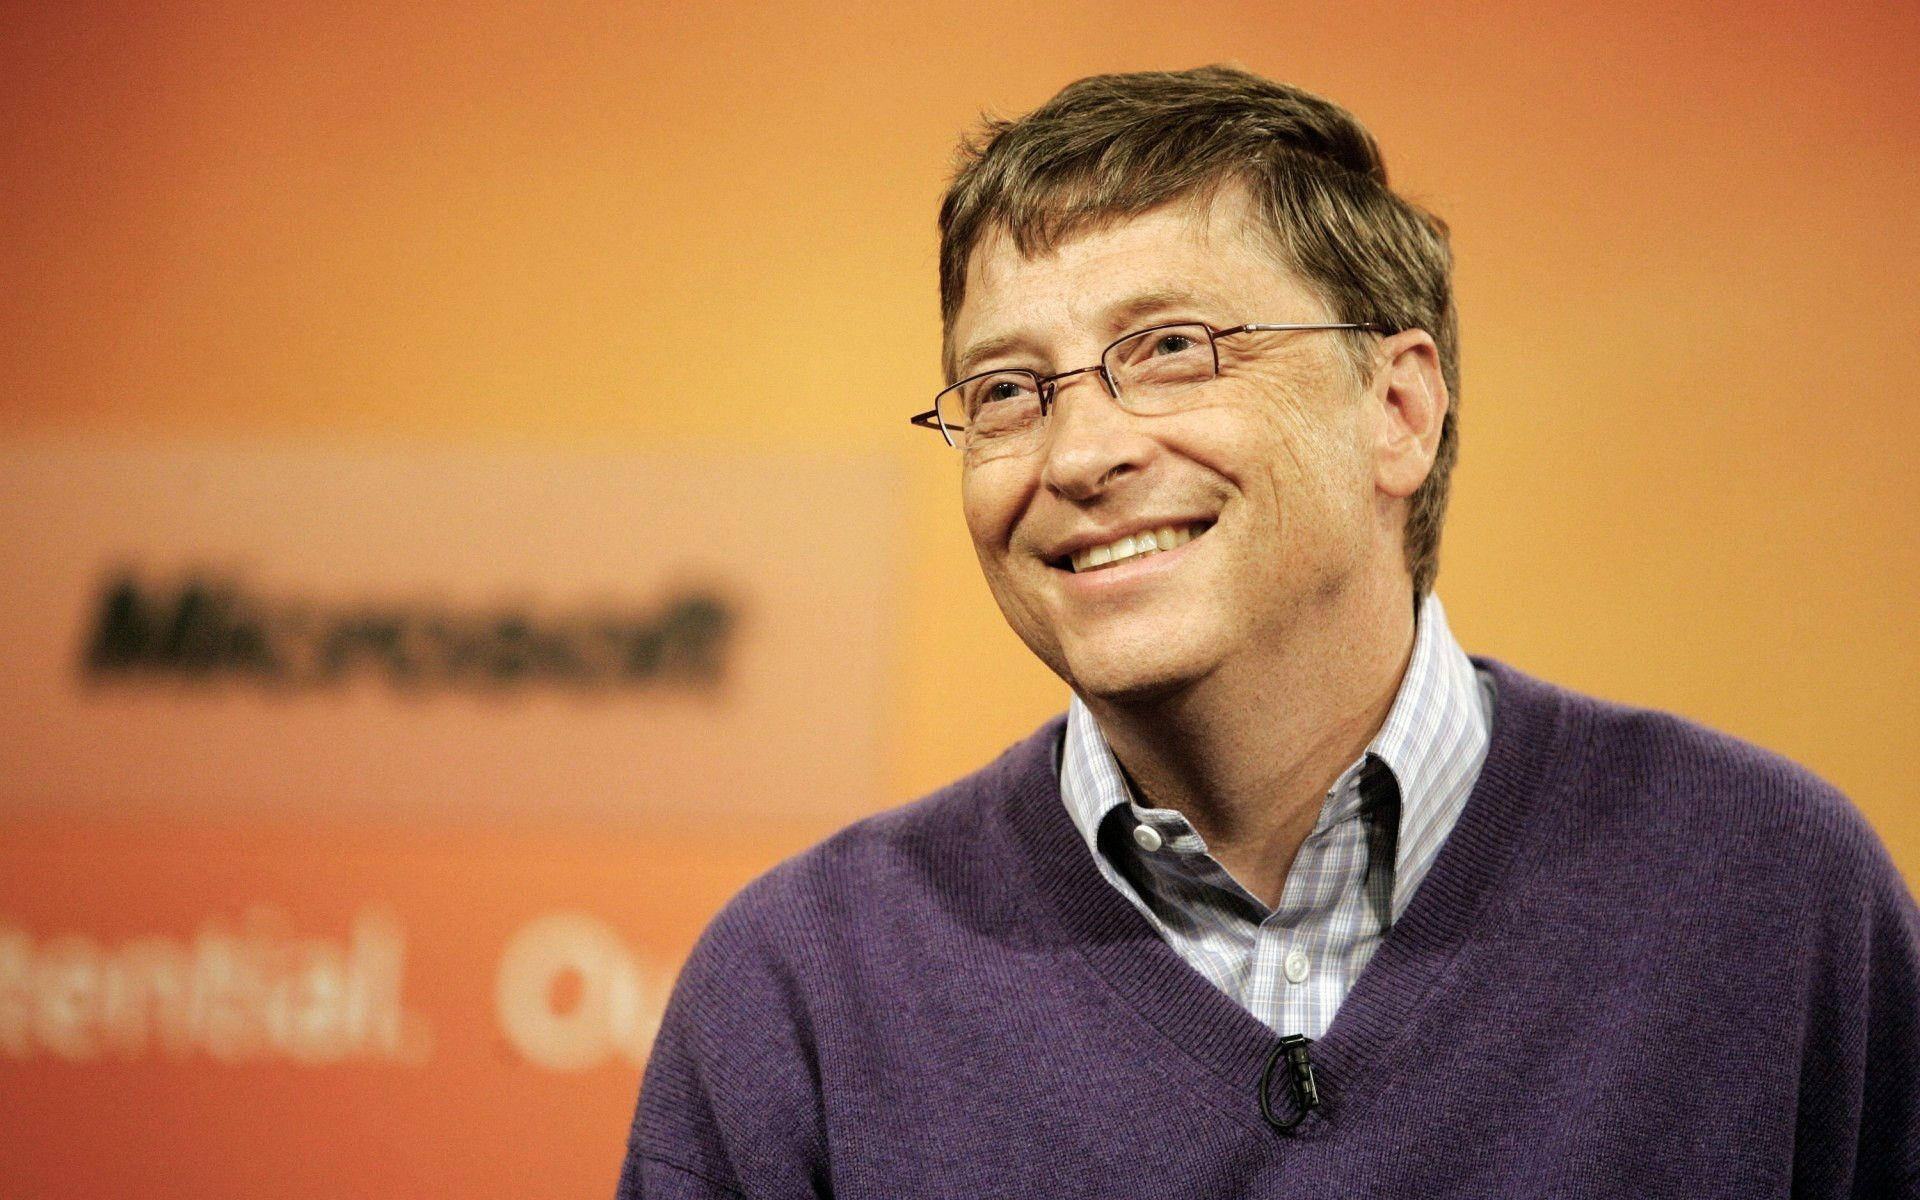 Bill Gates Pictures